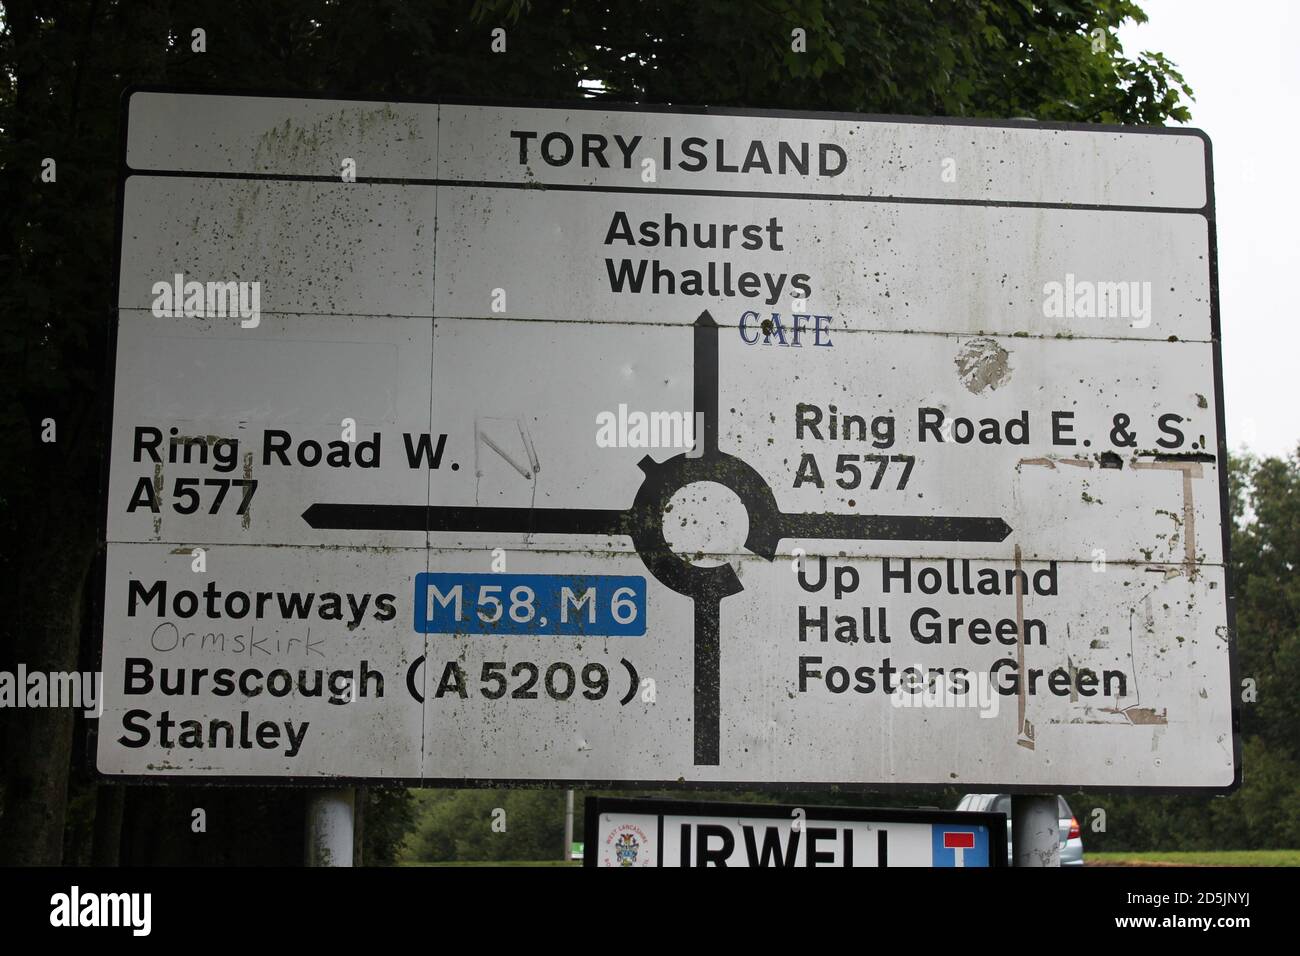 Tory island road sign, grubby graffiti road sign, satirical graffiti with a political sense of humour, political roundabout Stock Photo